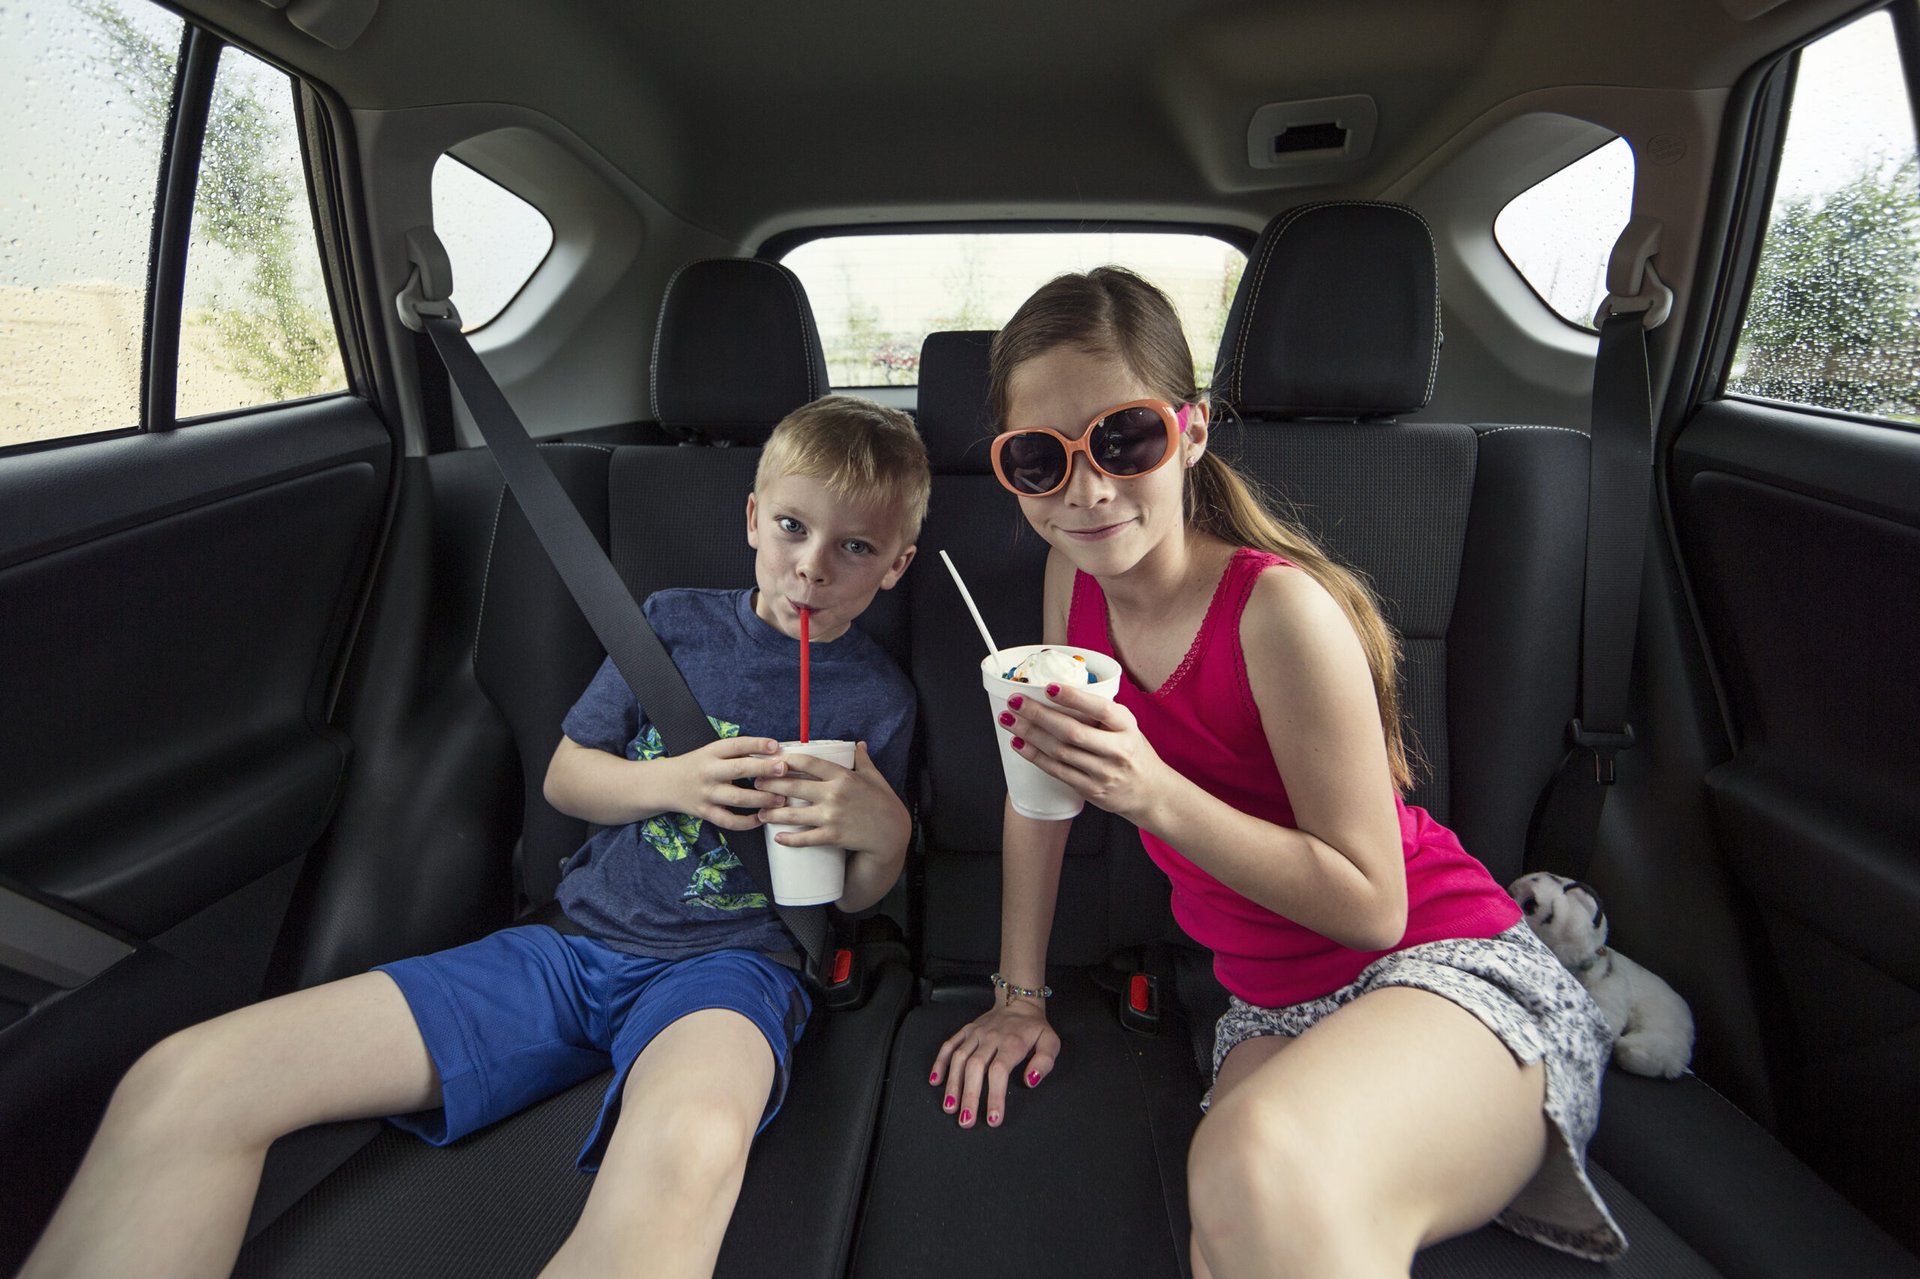 Kids eating food from the drive-thru